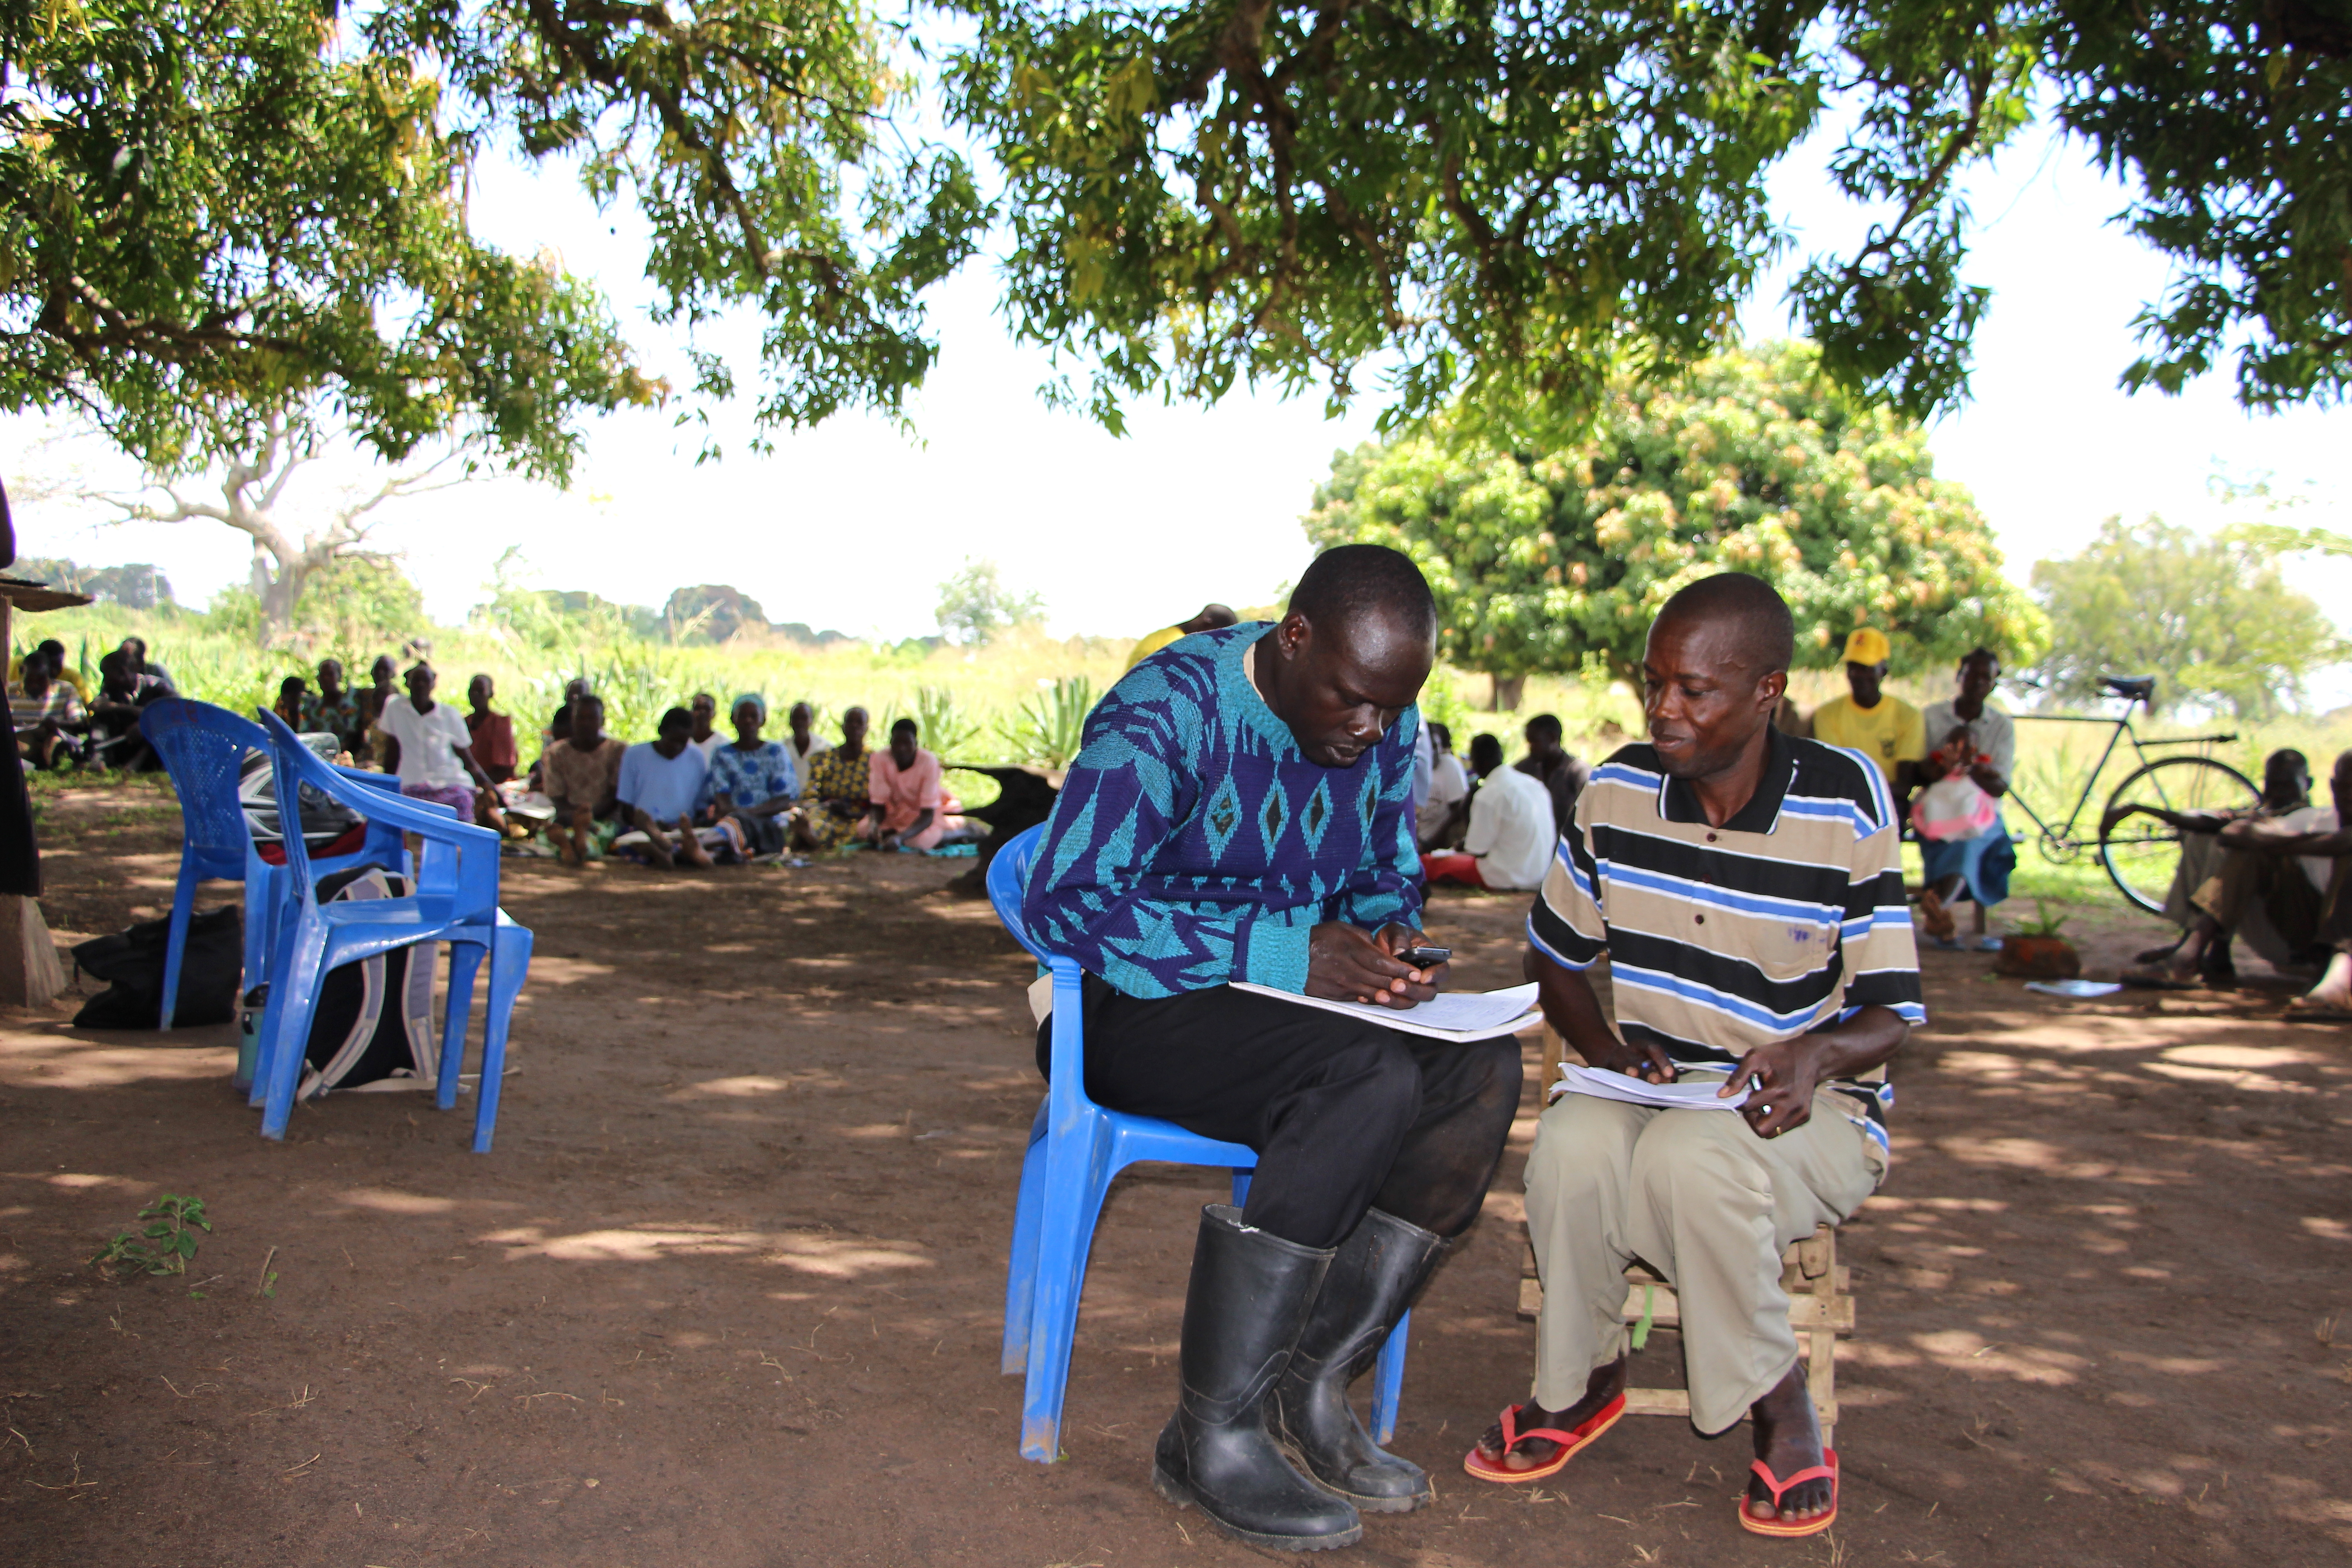 Village Enterprise Field Coordinator Maurice Eriaku works with a Business Owner to complete the Small Business Survey.